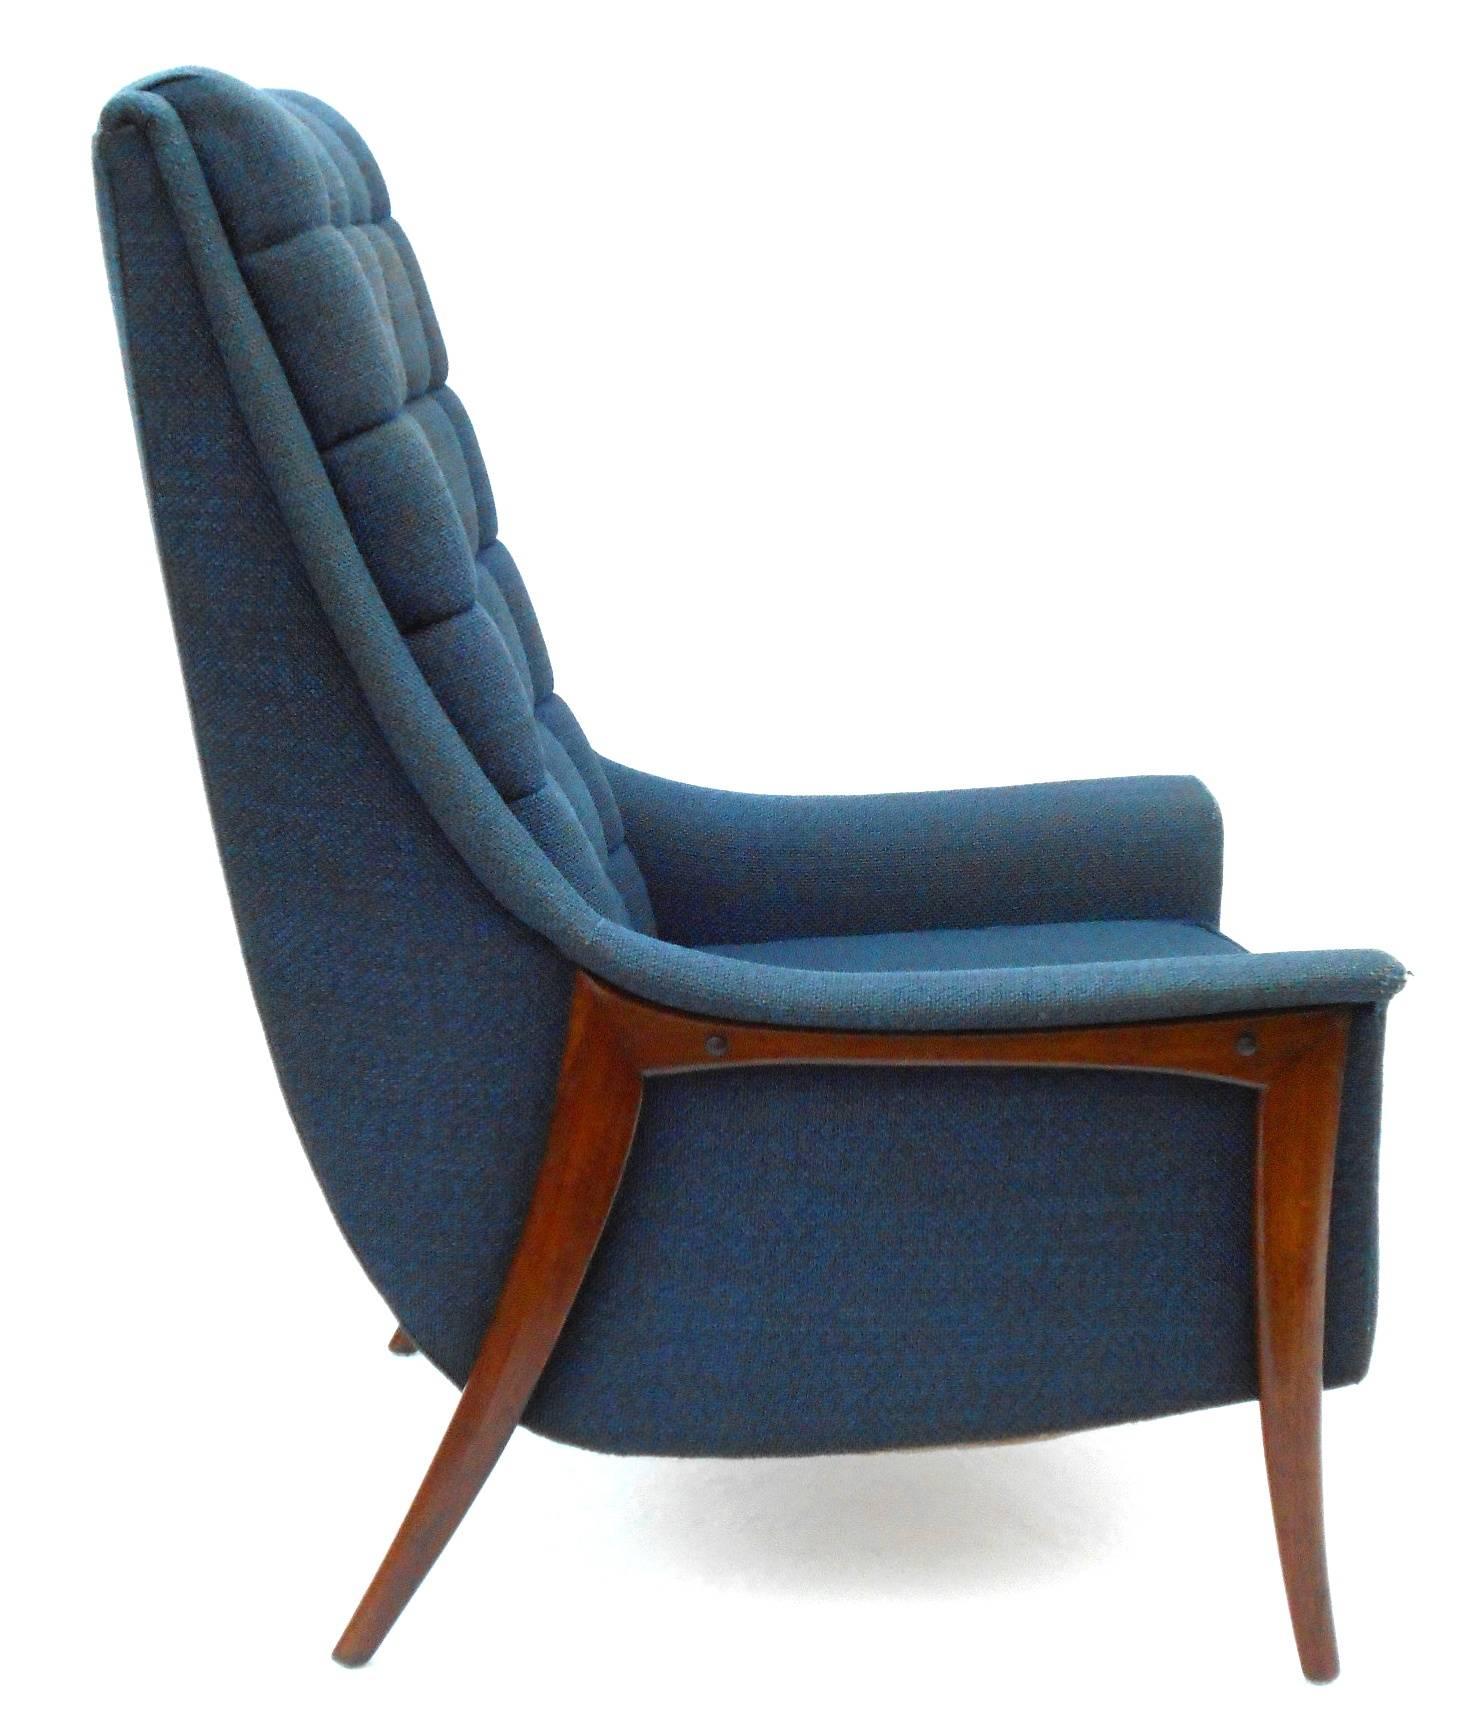 High back mid century lounge chair by Kroehler.